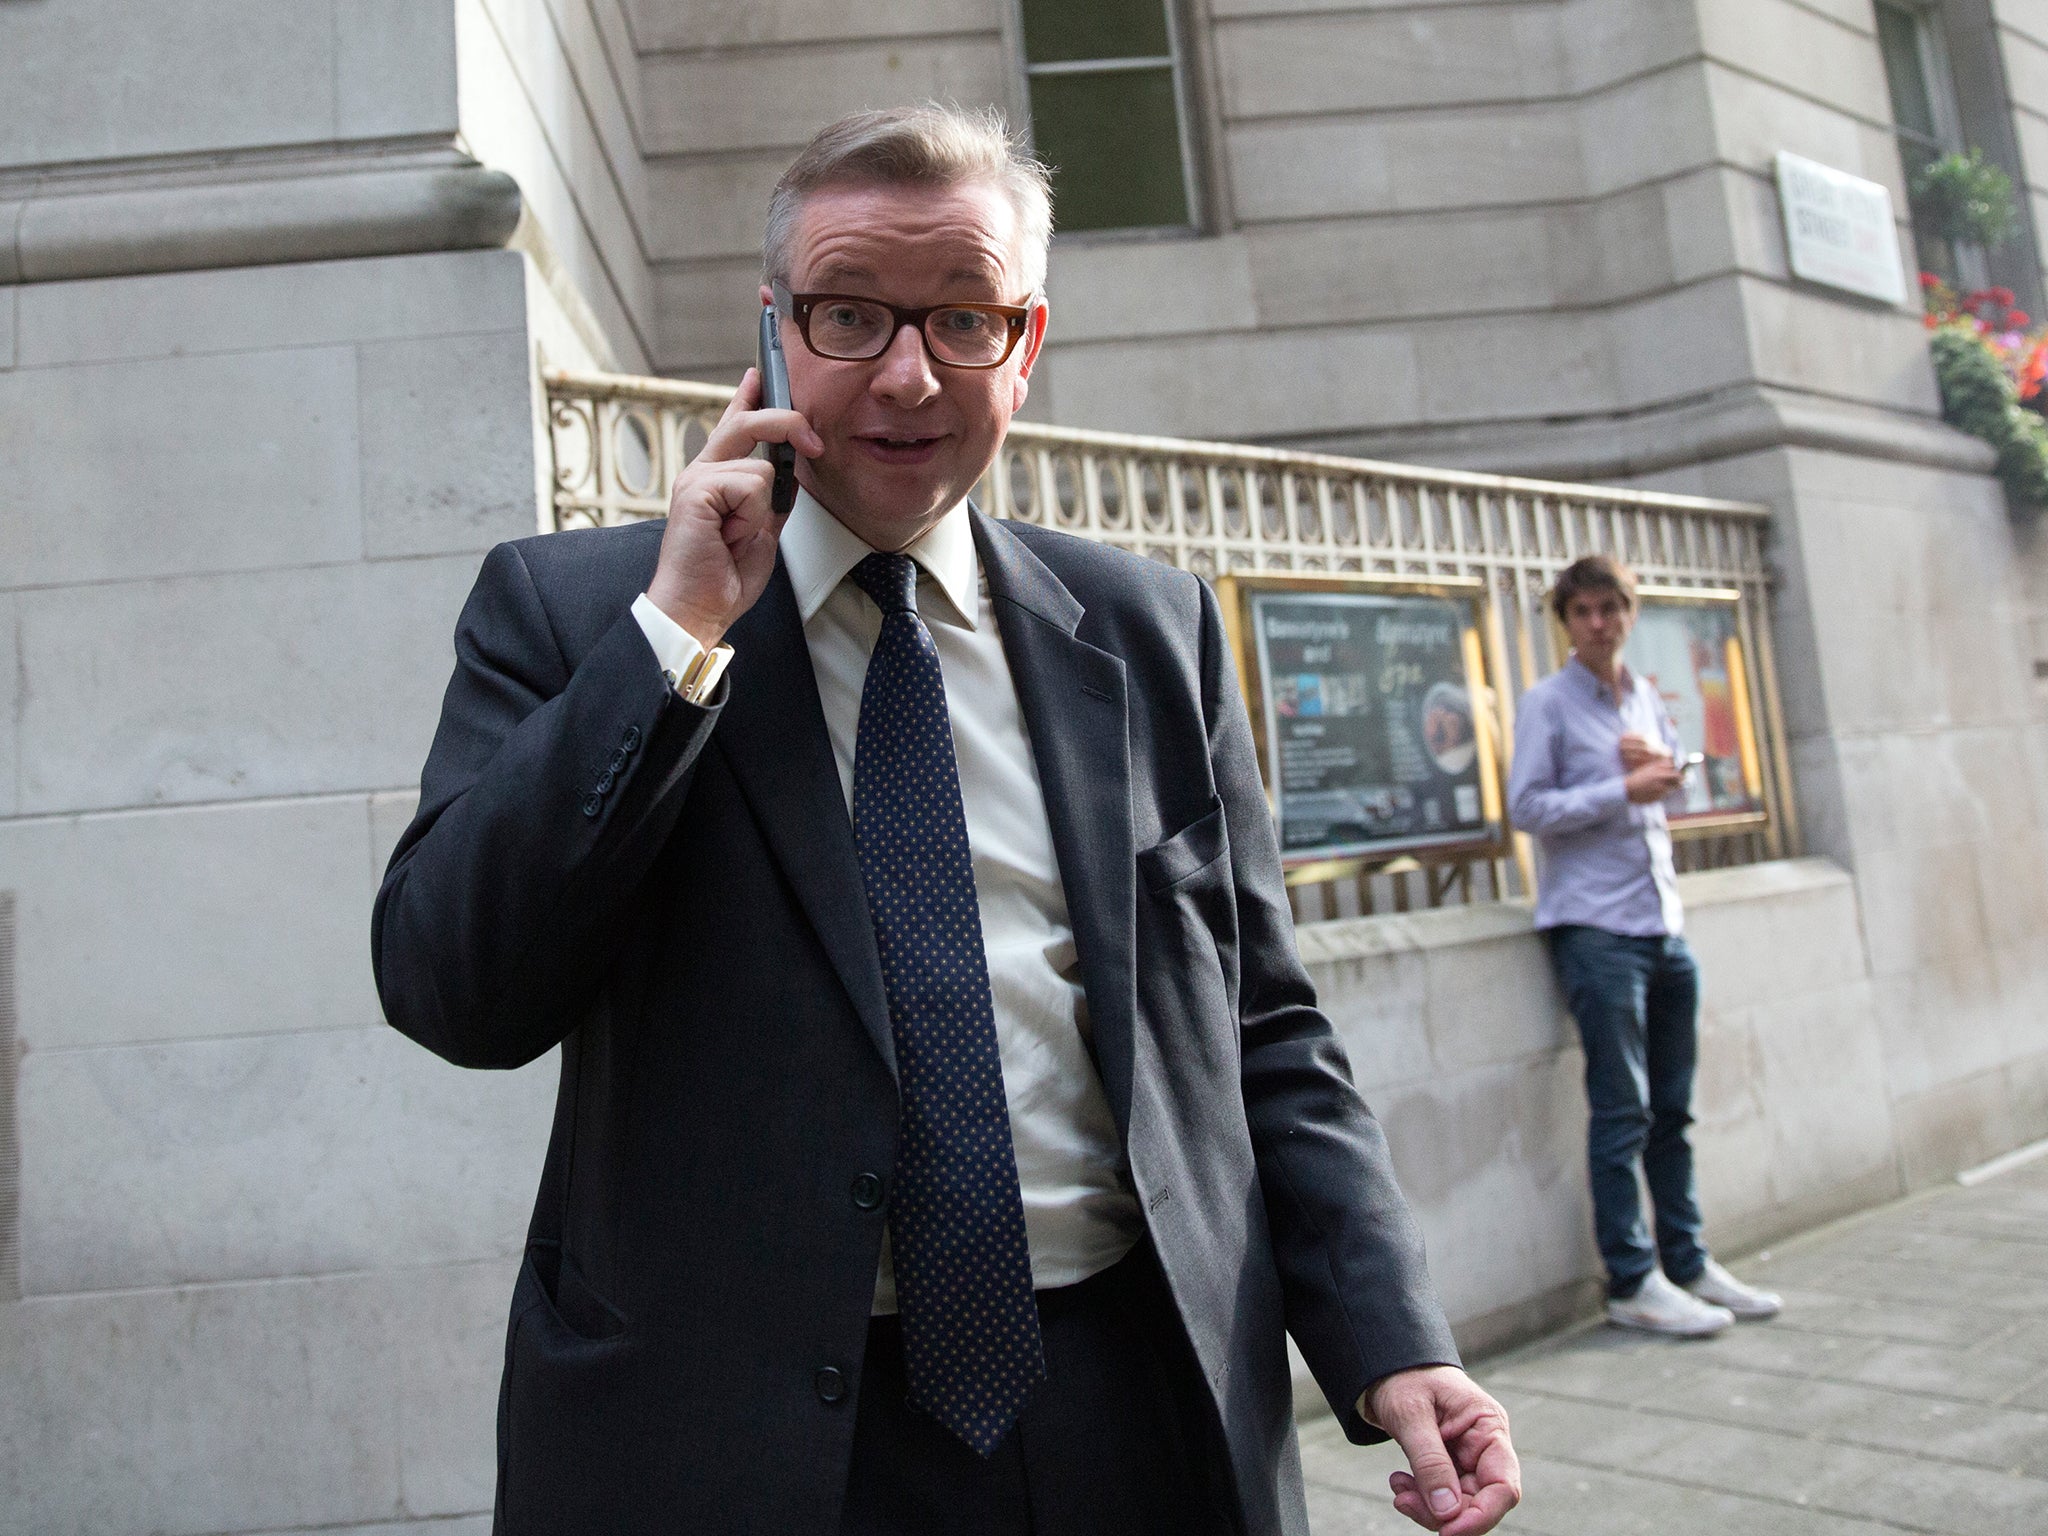 The tickets Michael Gove accepted had a combined value of £1,250 (Getty)